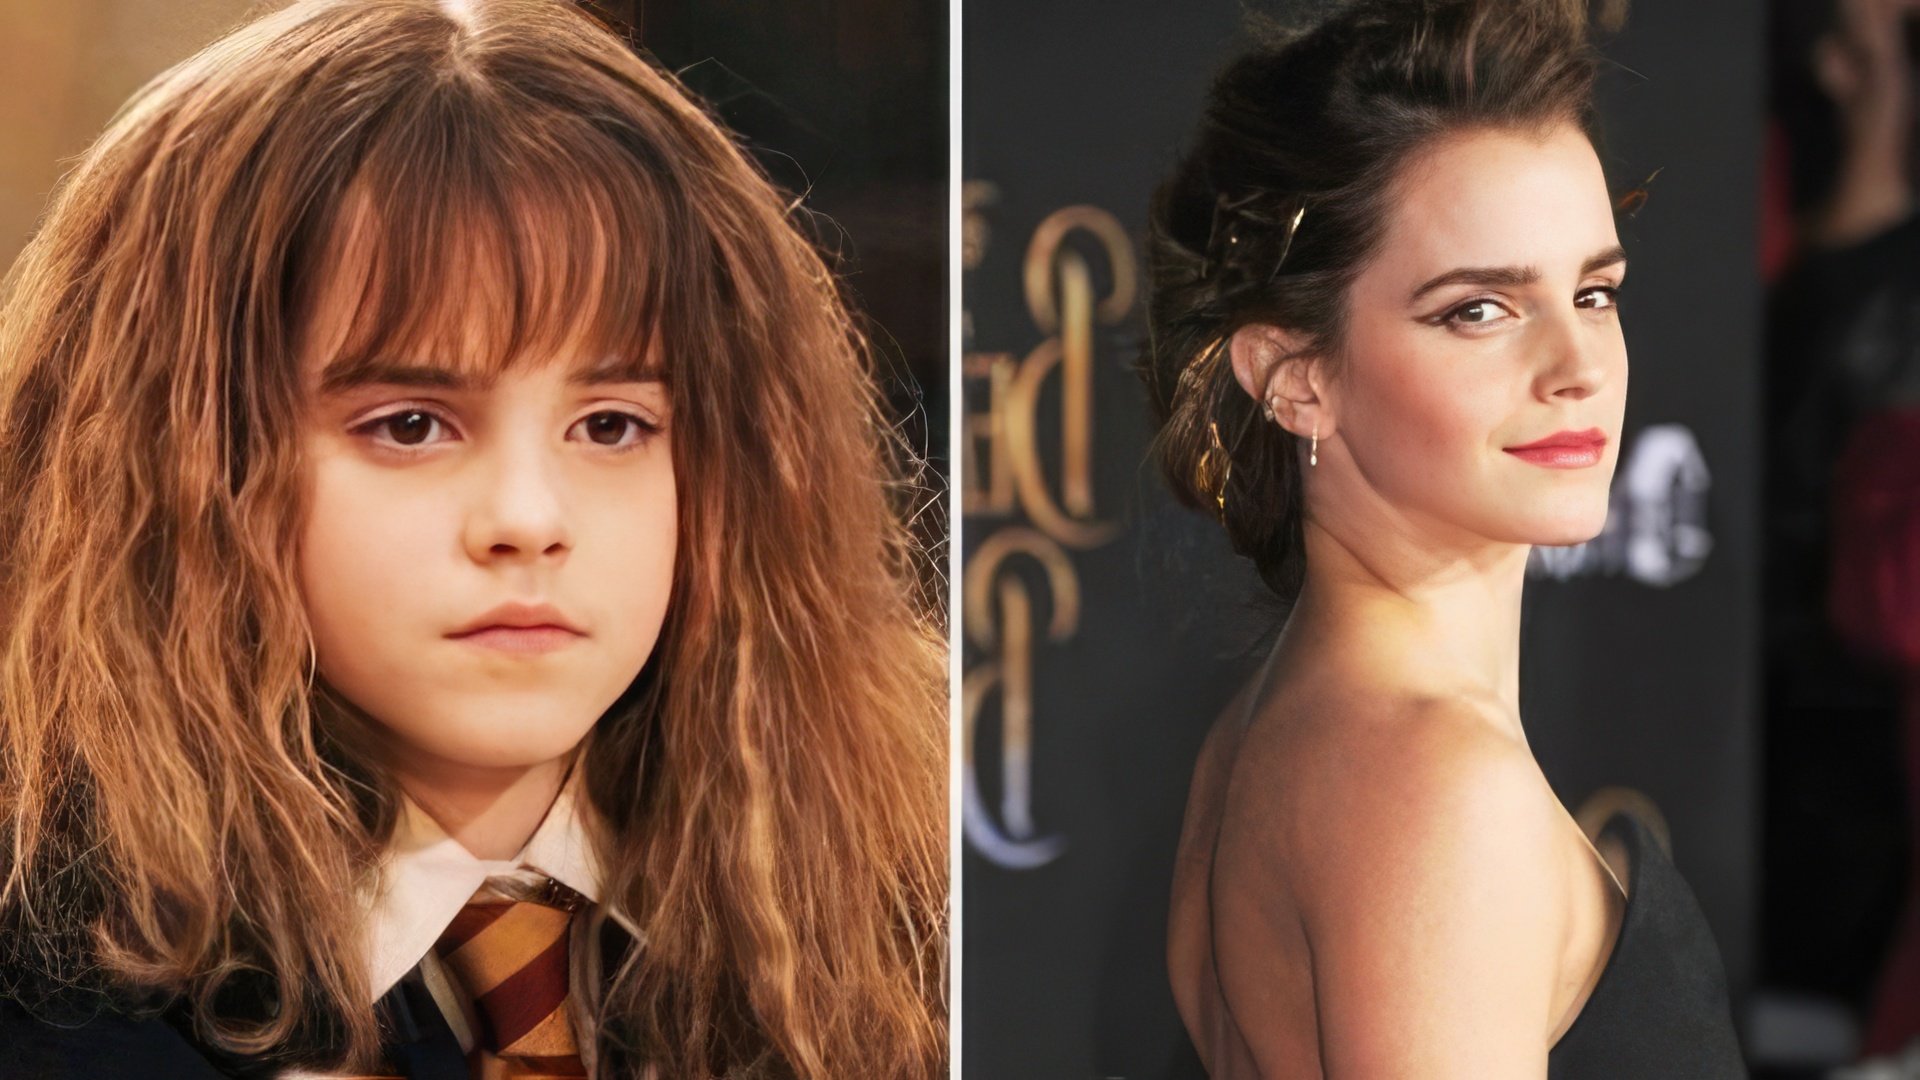 Hermione has grown up